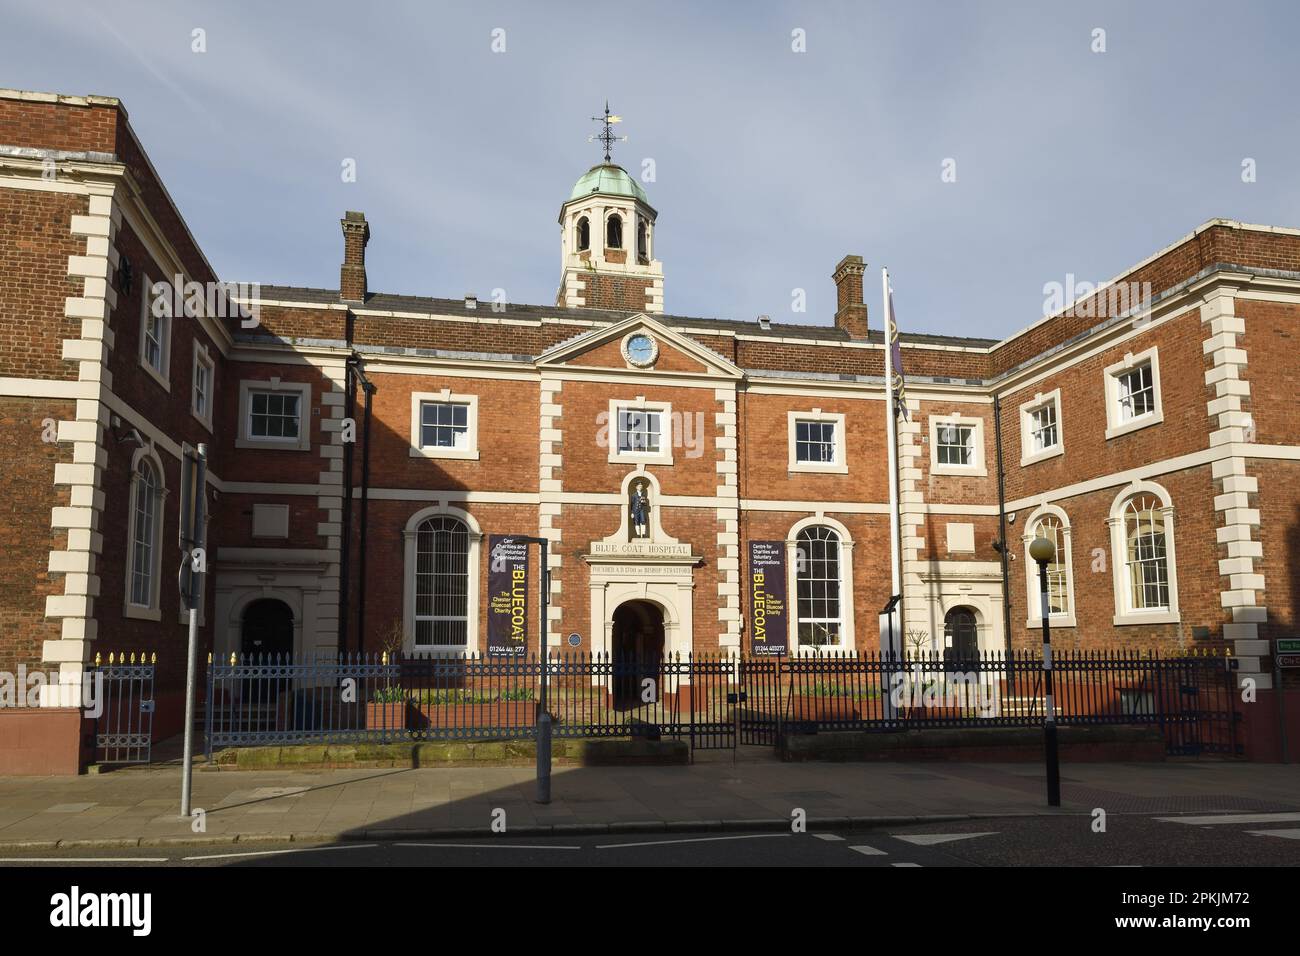 The exterior of the Bluecoat Hospital building on Northgate Street Chester UK Stock Photo